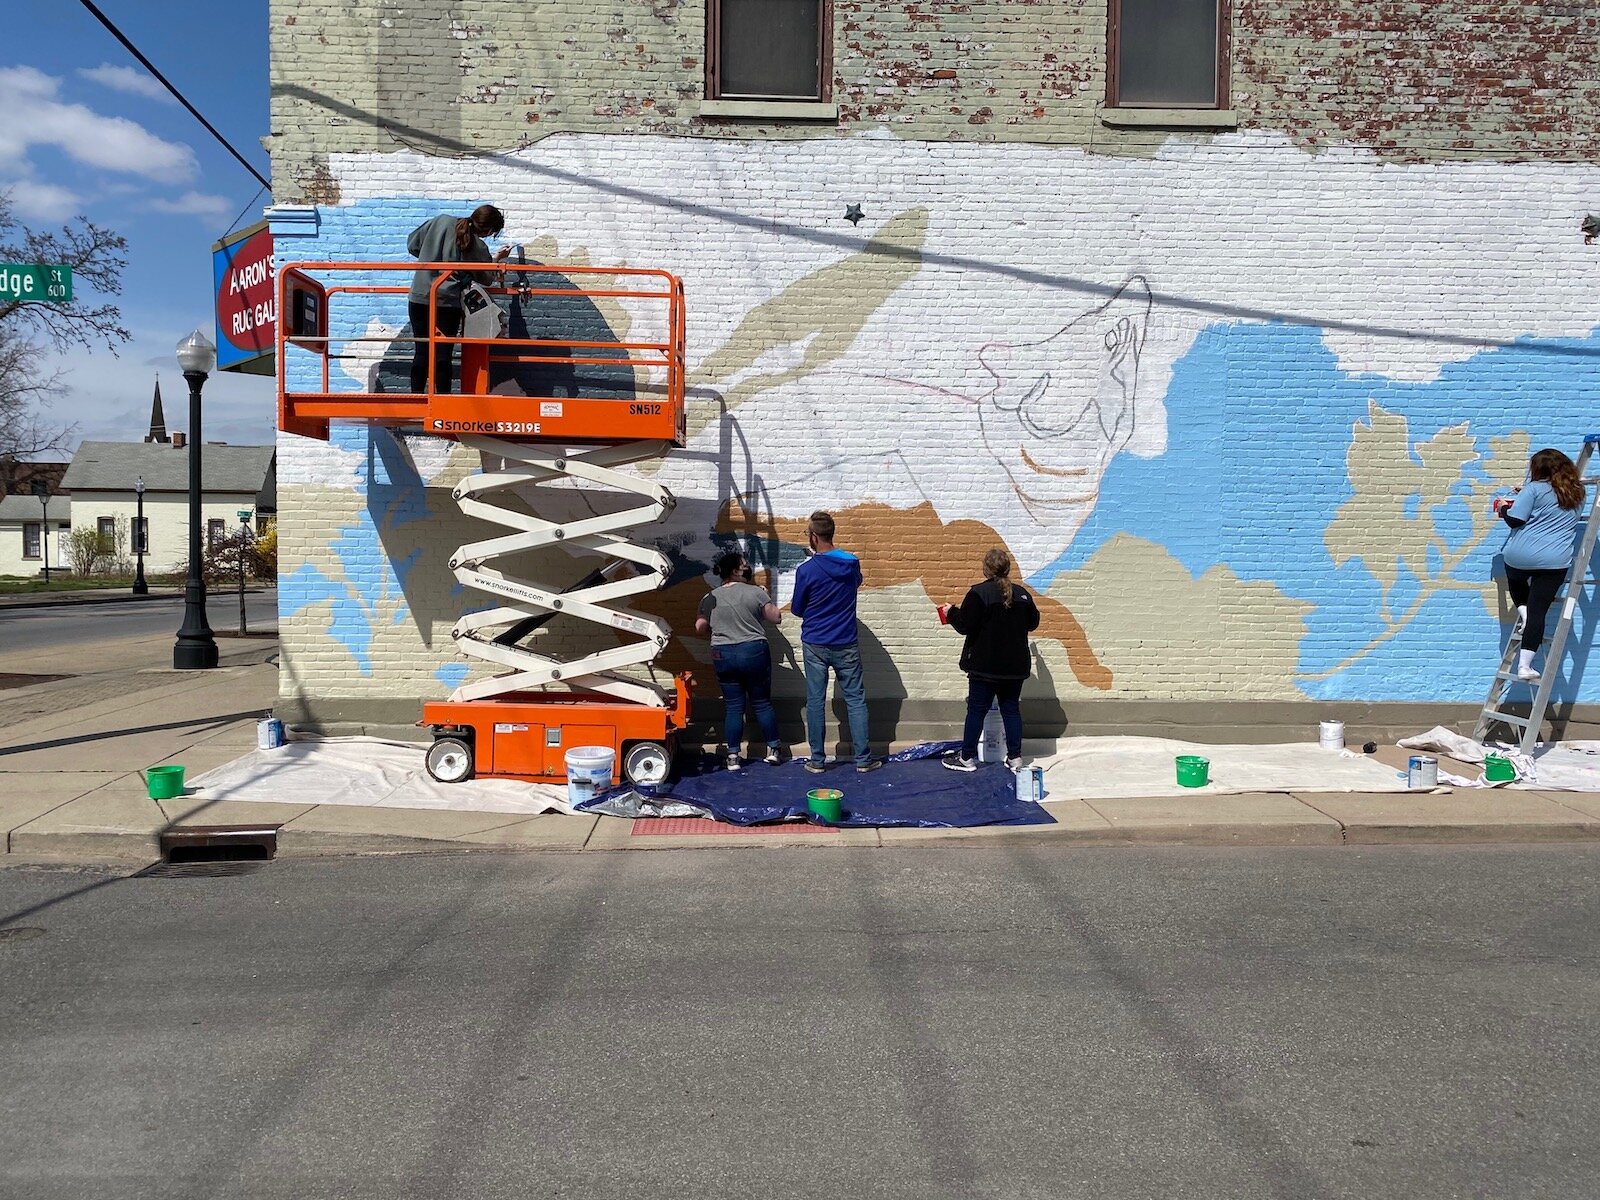 USF’s Mural Painting and Public Art Class works on a mural in downtown Fort Wayne at 1217 Broadway.